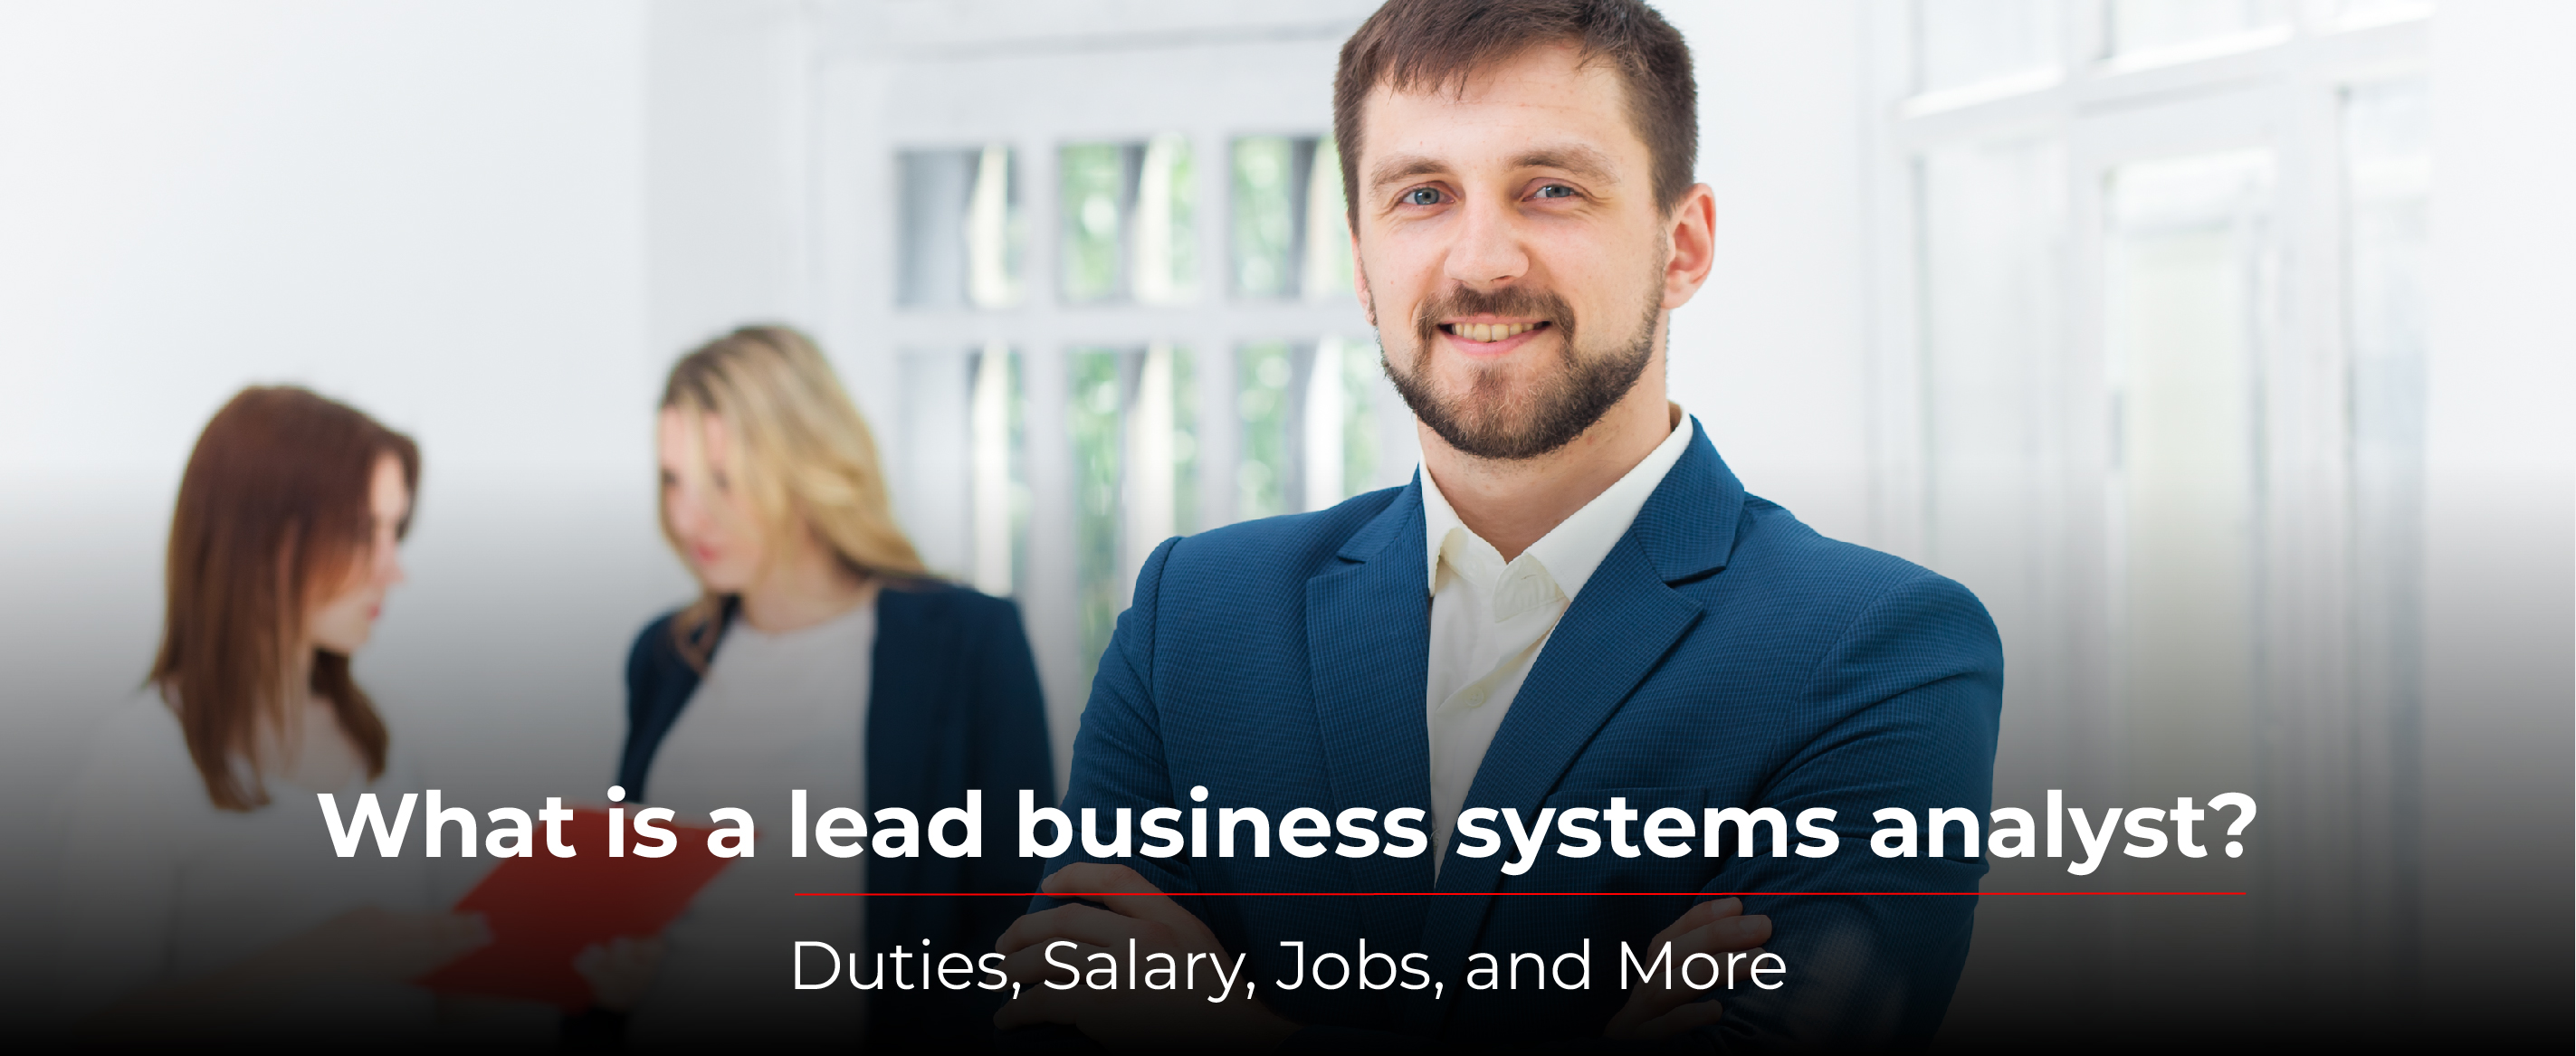 Lead business system analyst: Duties, Salary, Jobs, and More